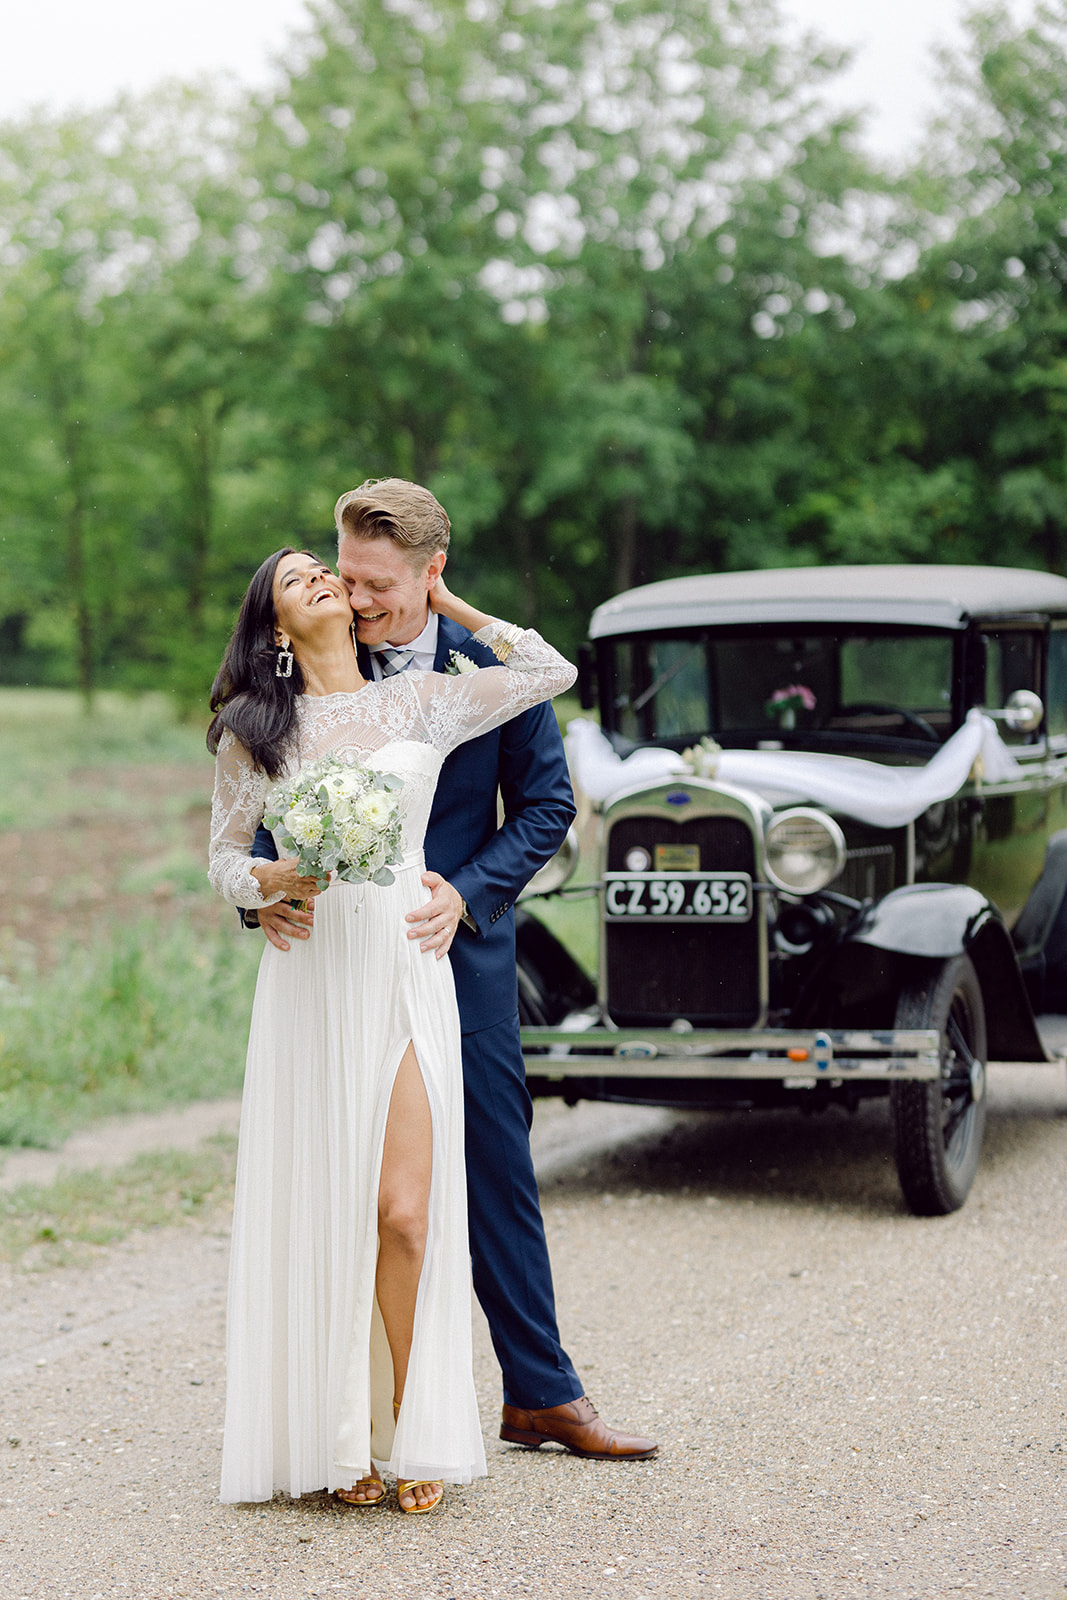 couple sitting at the back of the vintage car and smiling, kissing.